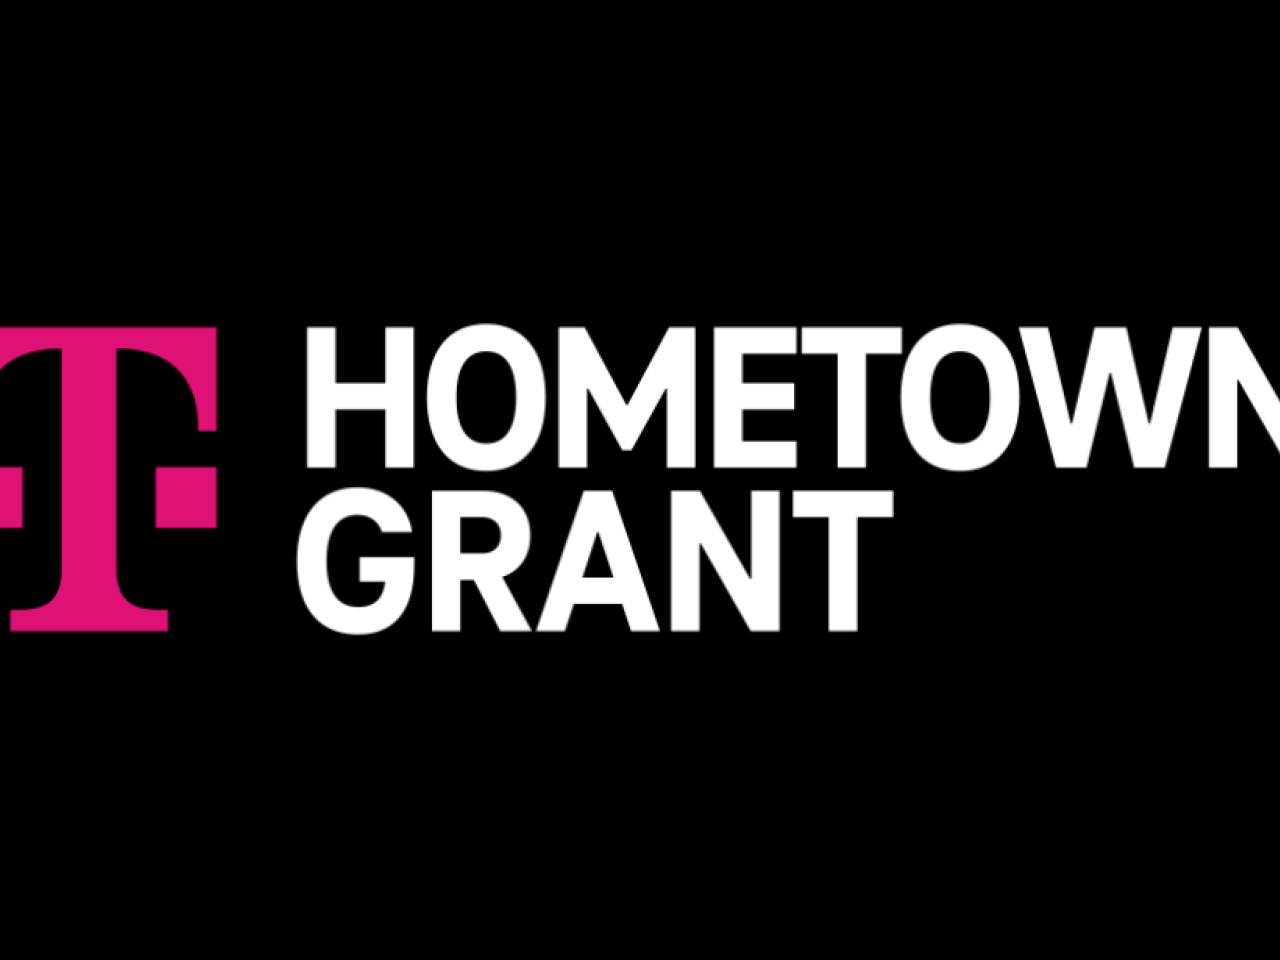 T-Mobile logo and "Hometown Grant" on a black background